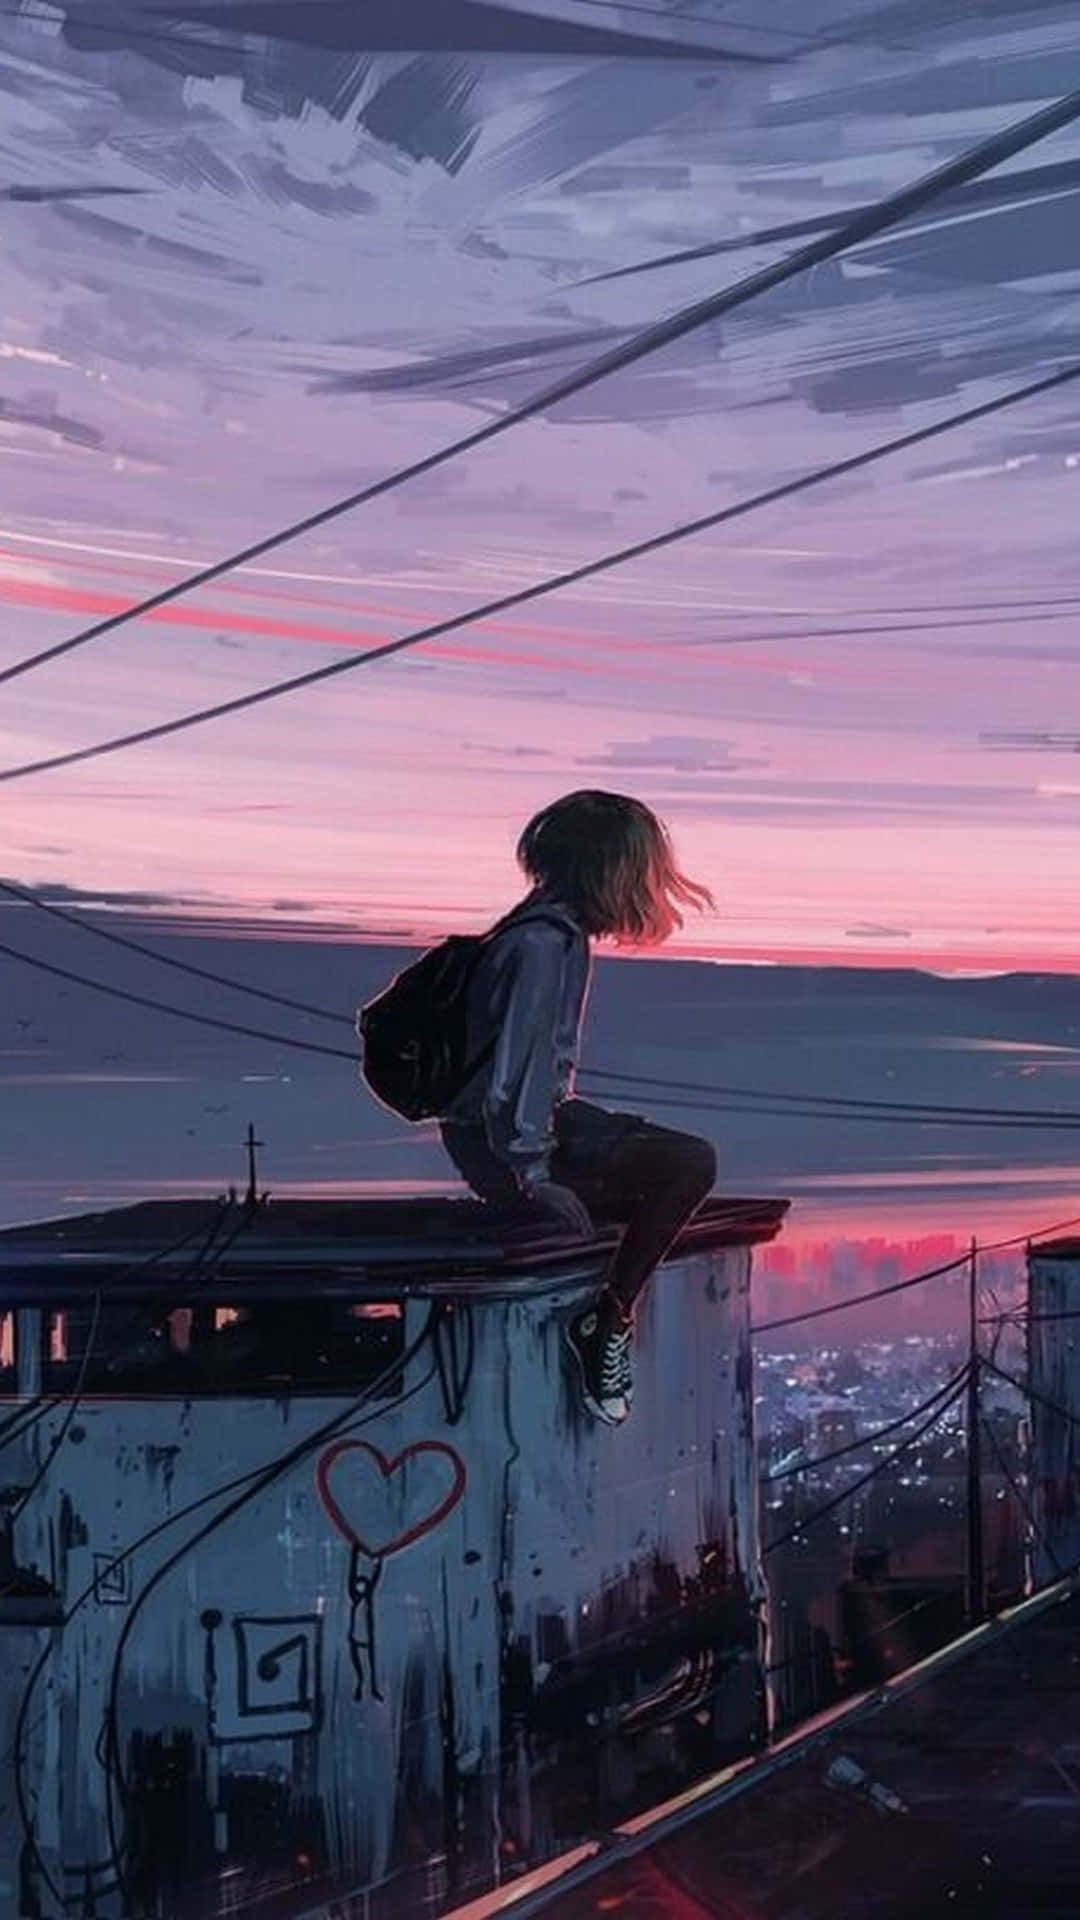 Anime Aesthetic - a diverse world of characters and vivid stories